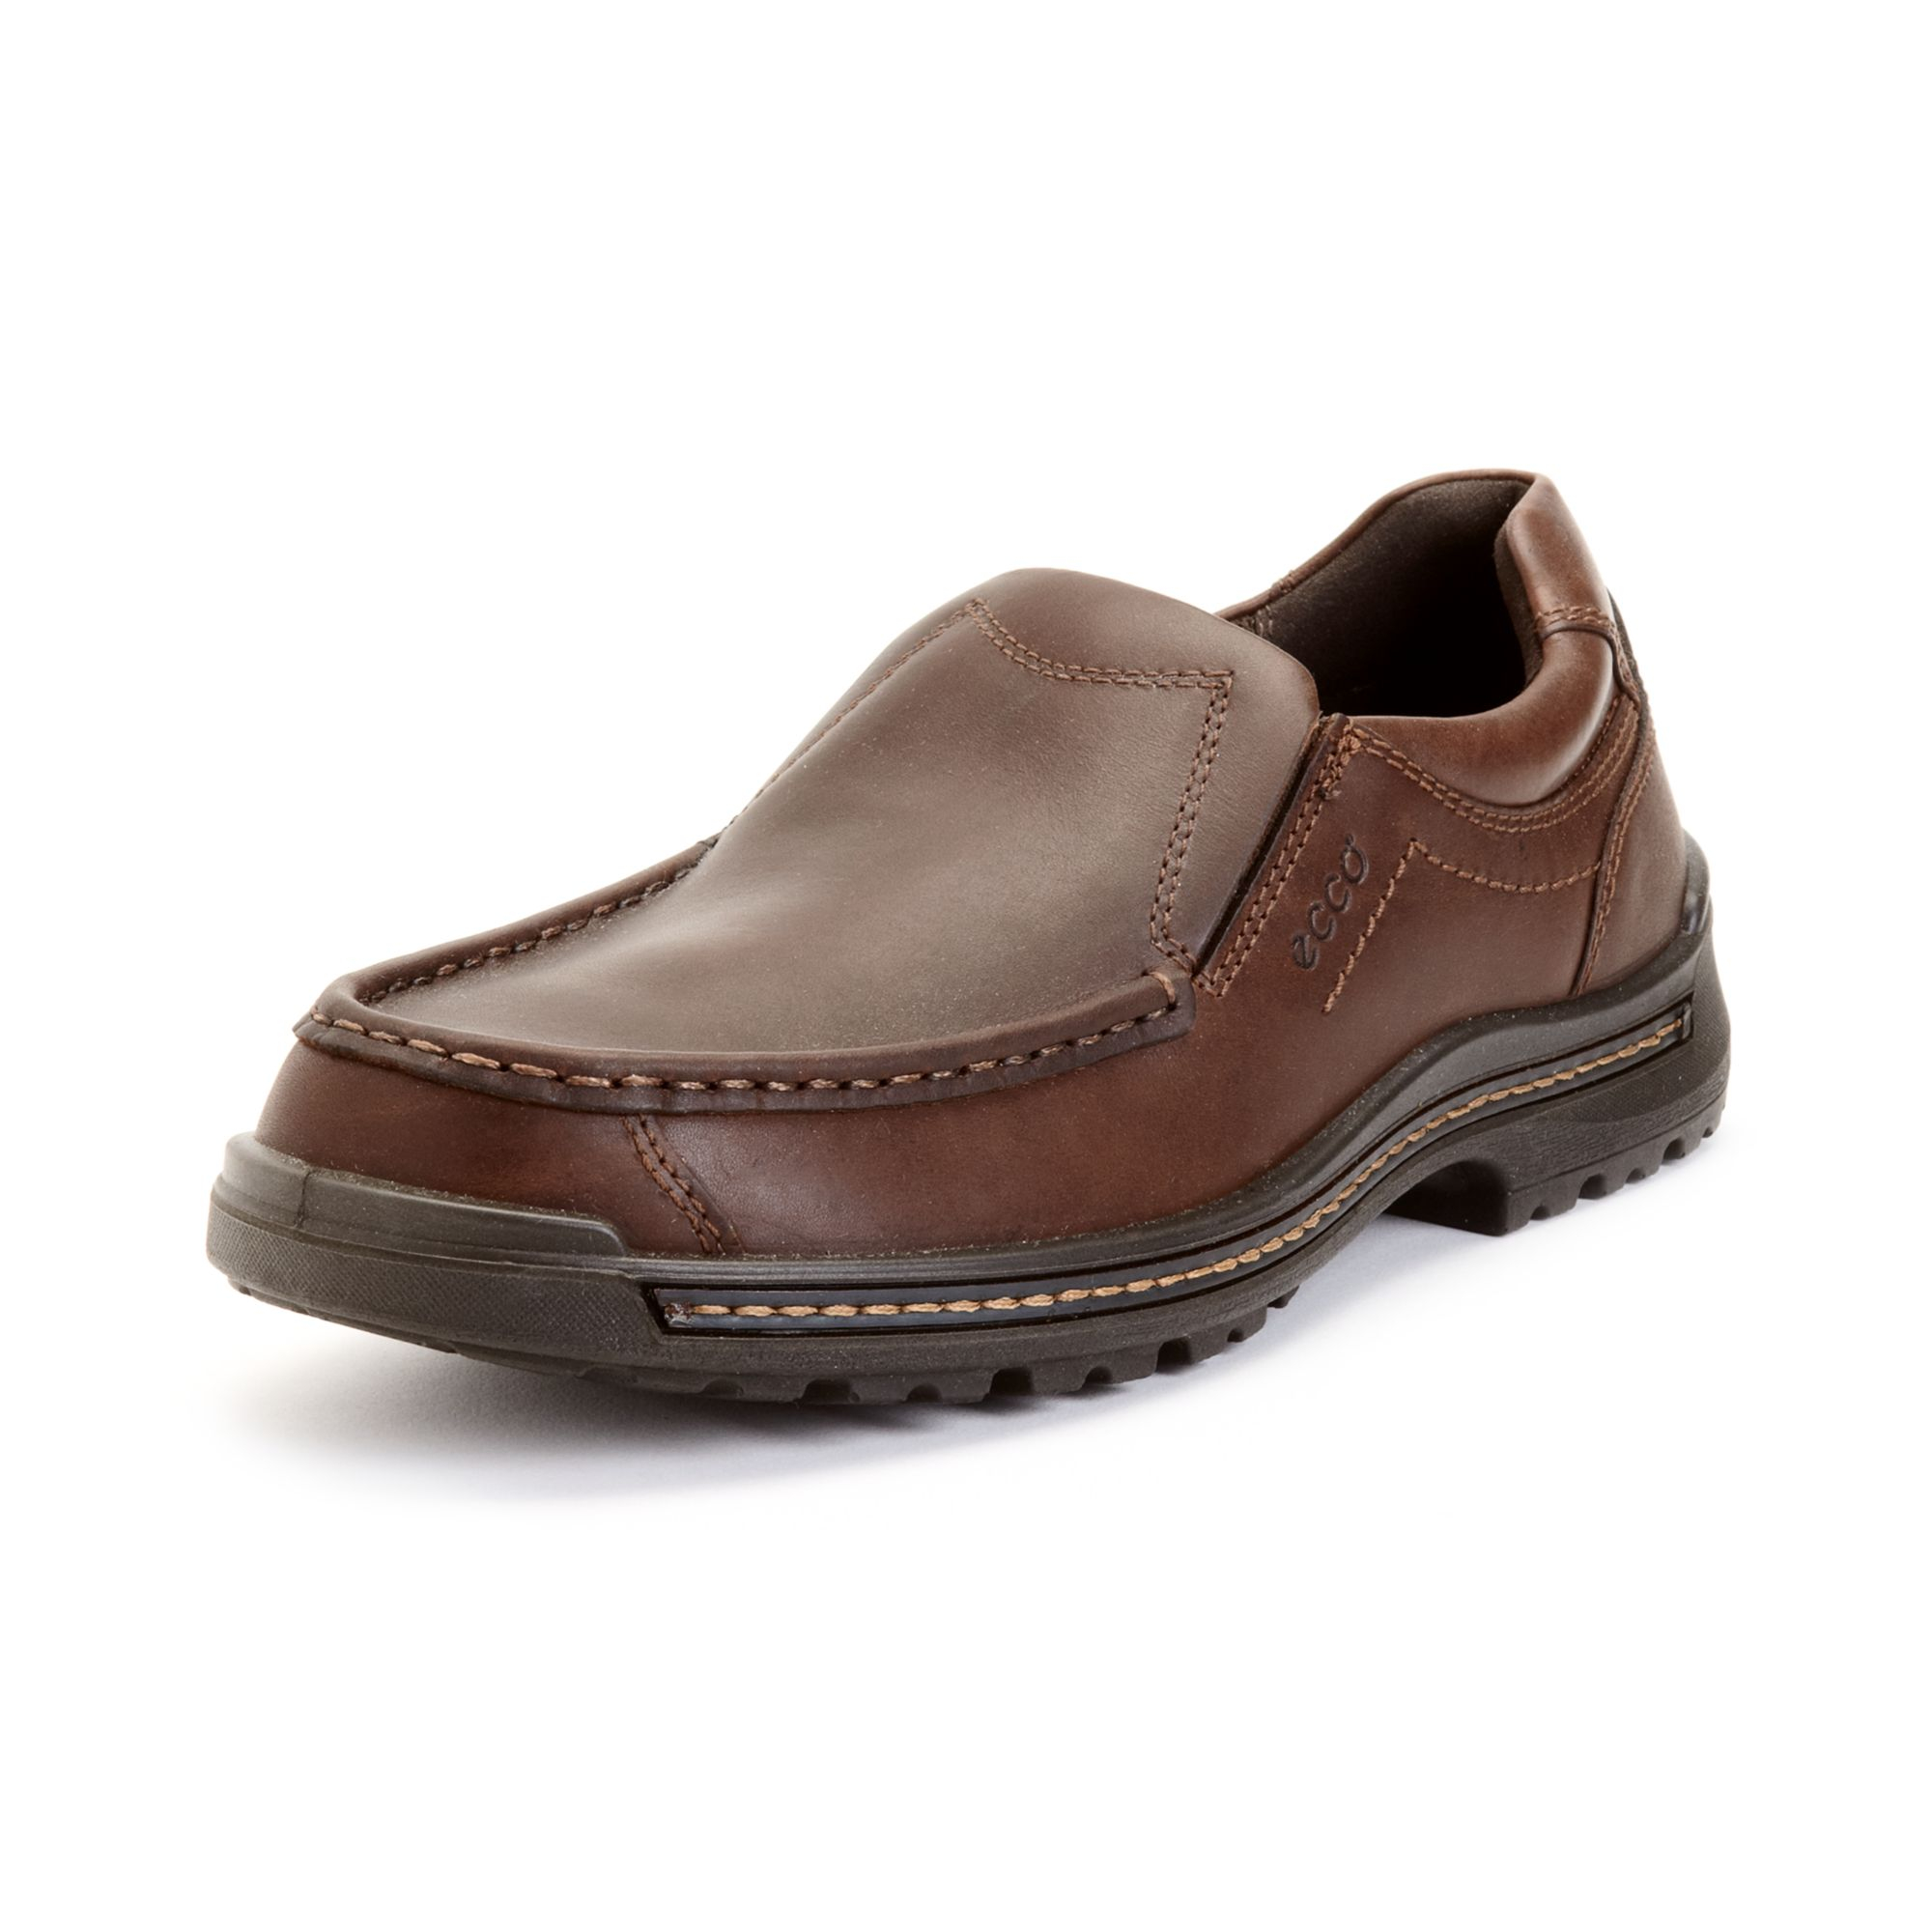 Ecco Iron Slipon Shoes in Brown for Men - Lyst